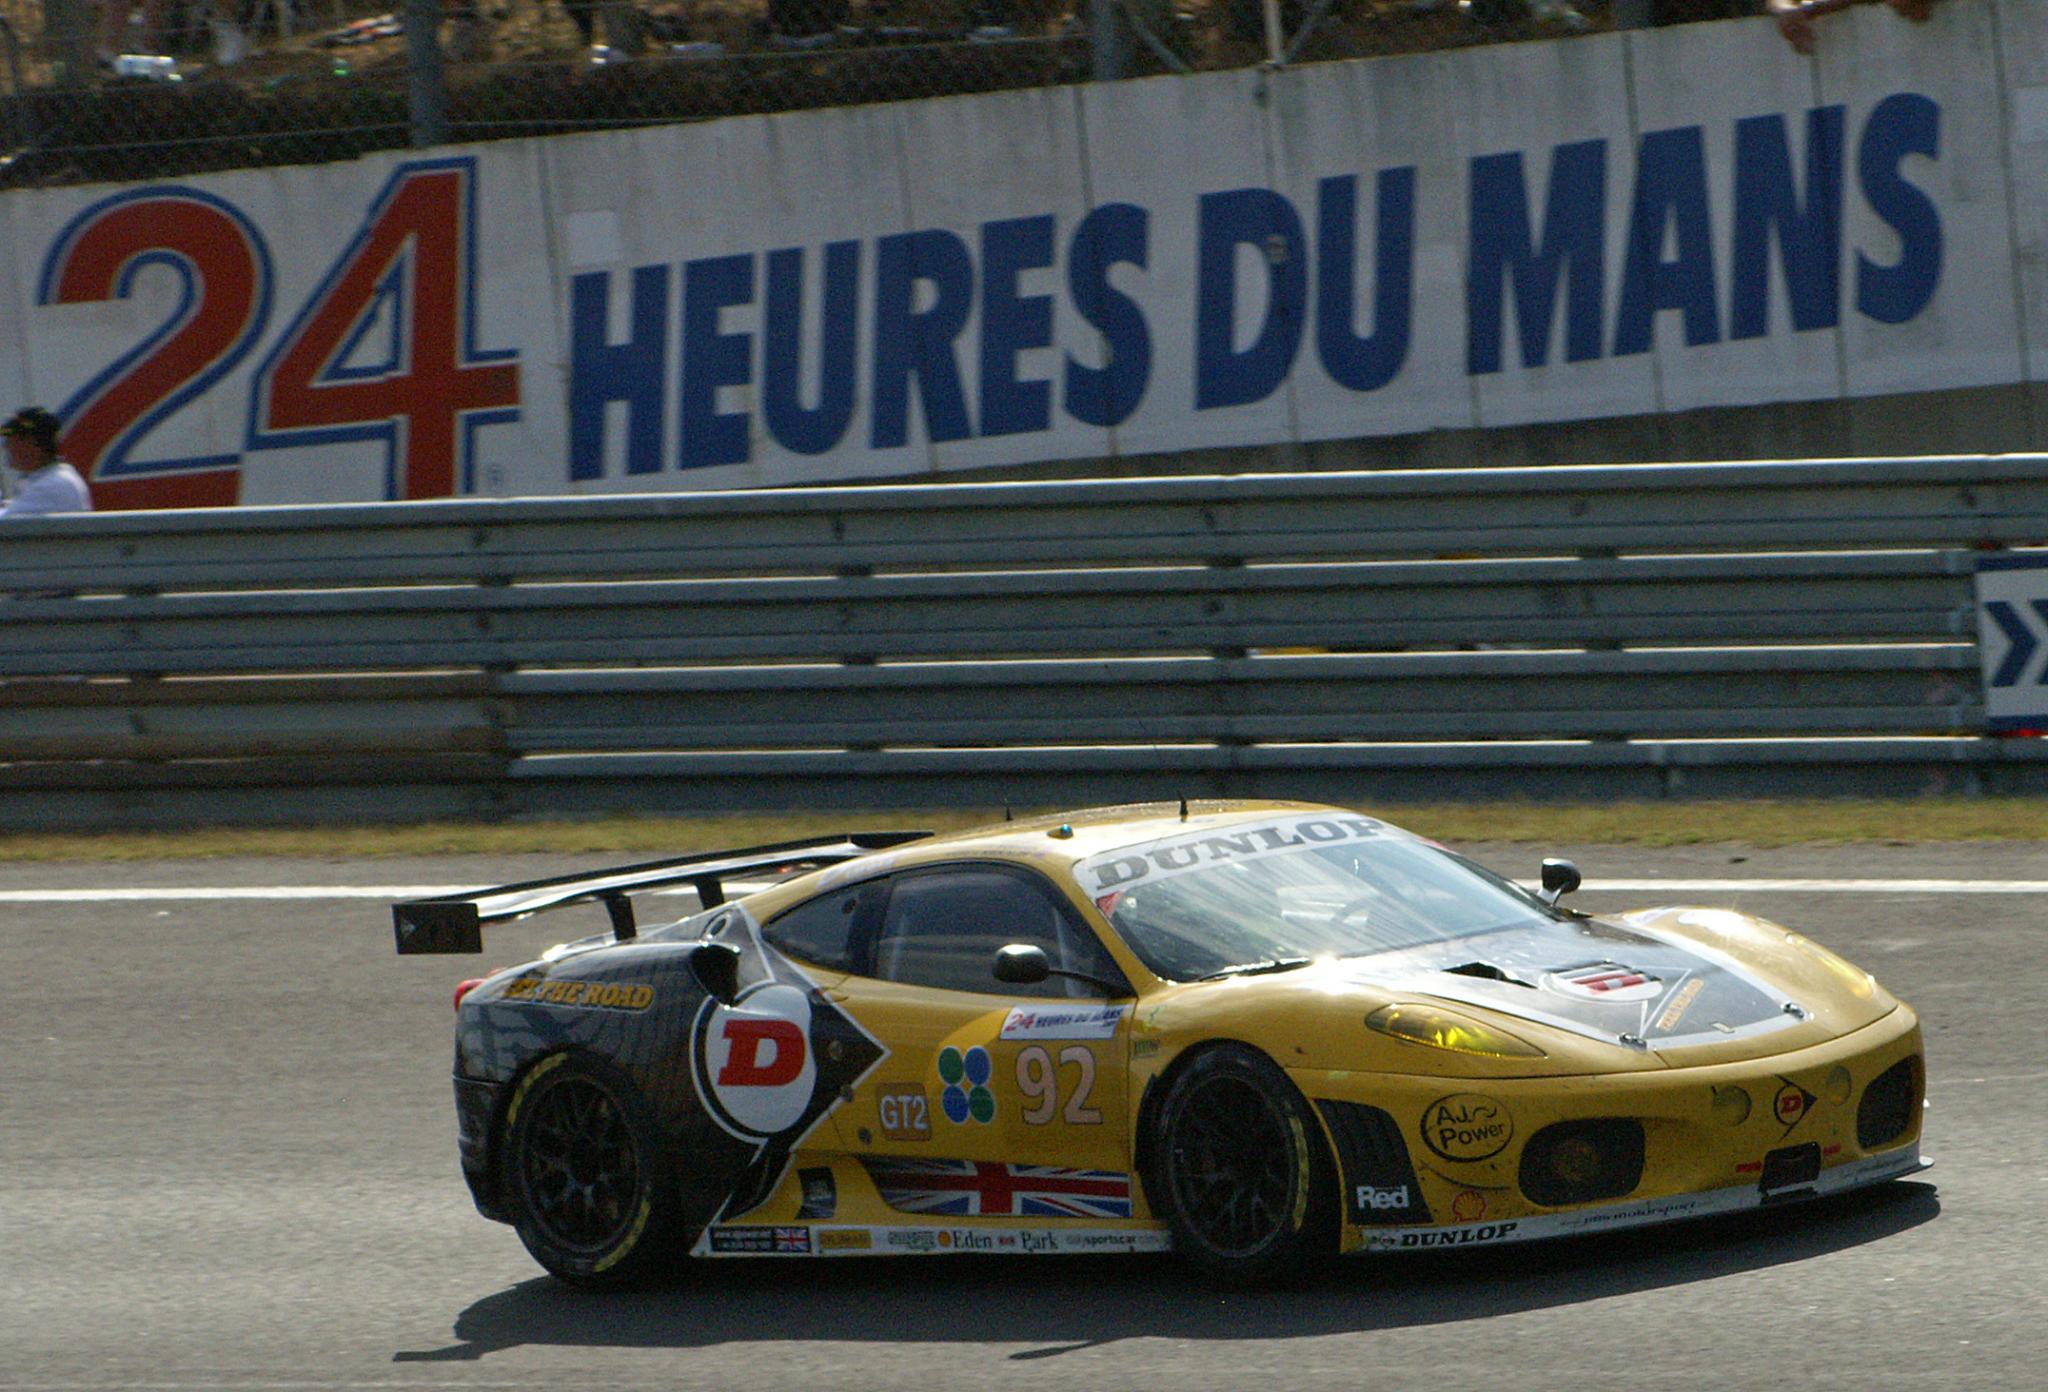 a race car with the number 24 heness du manne